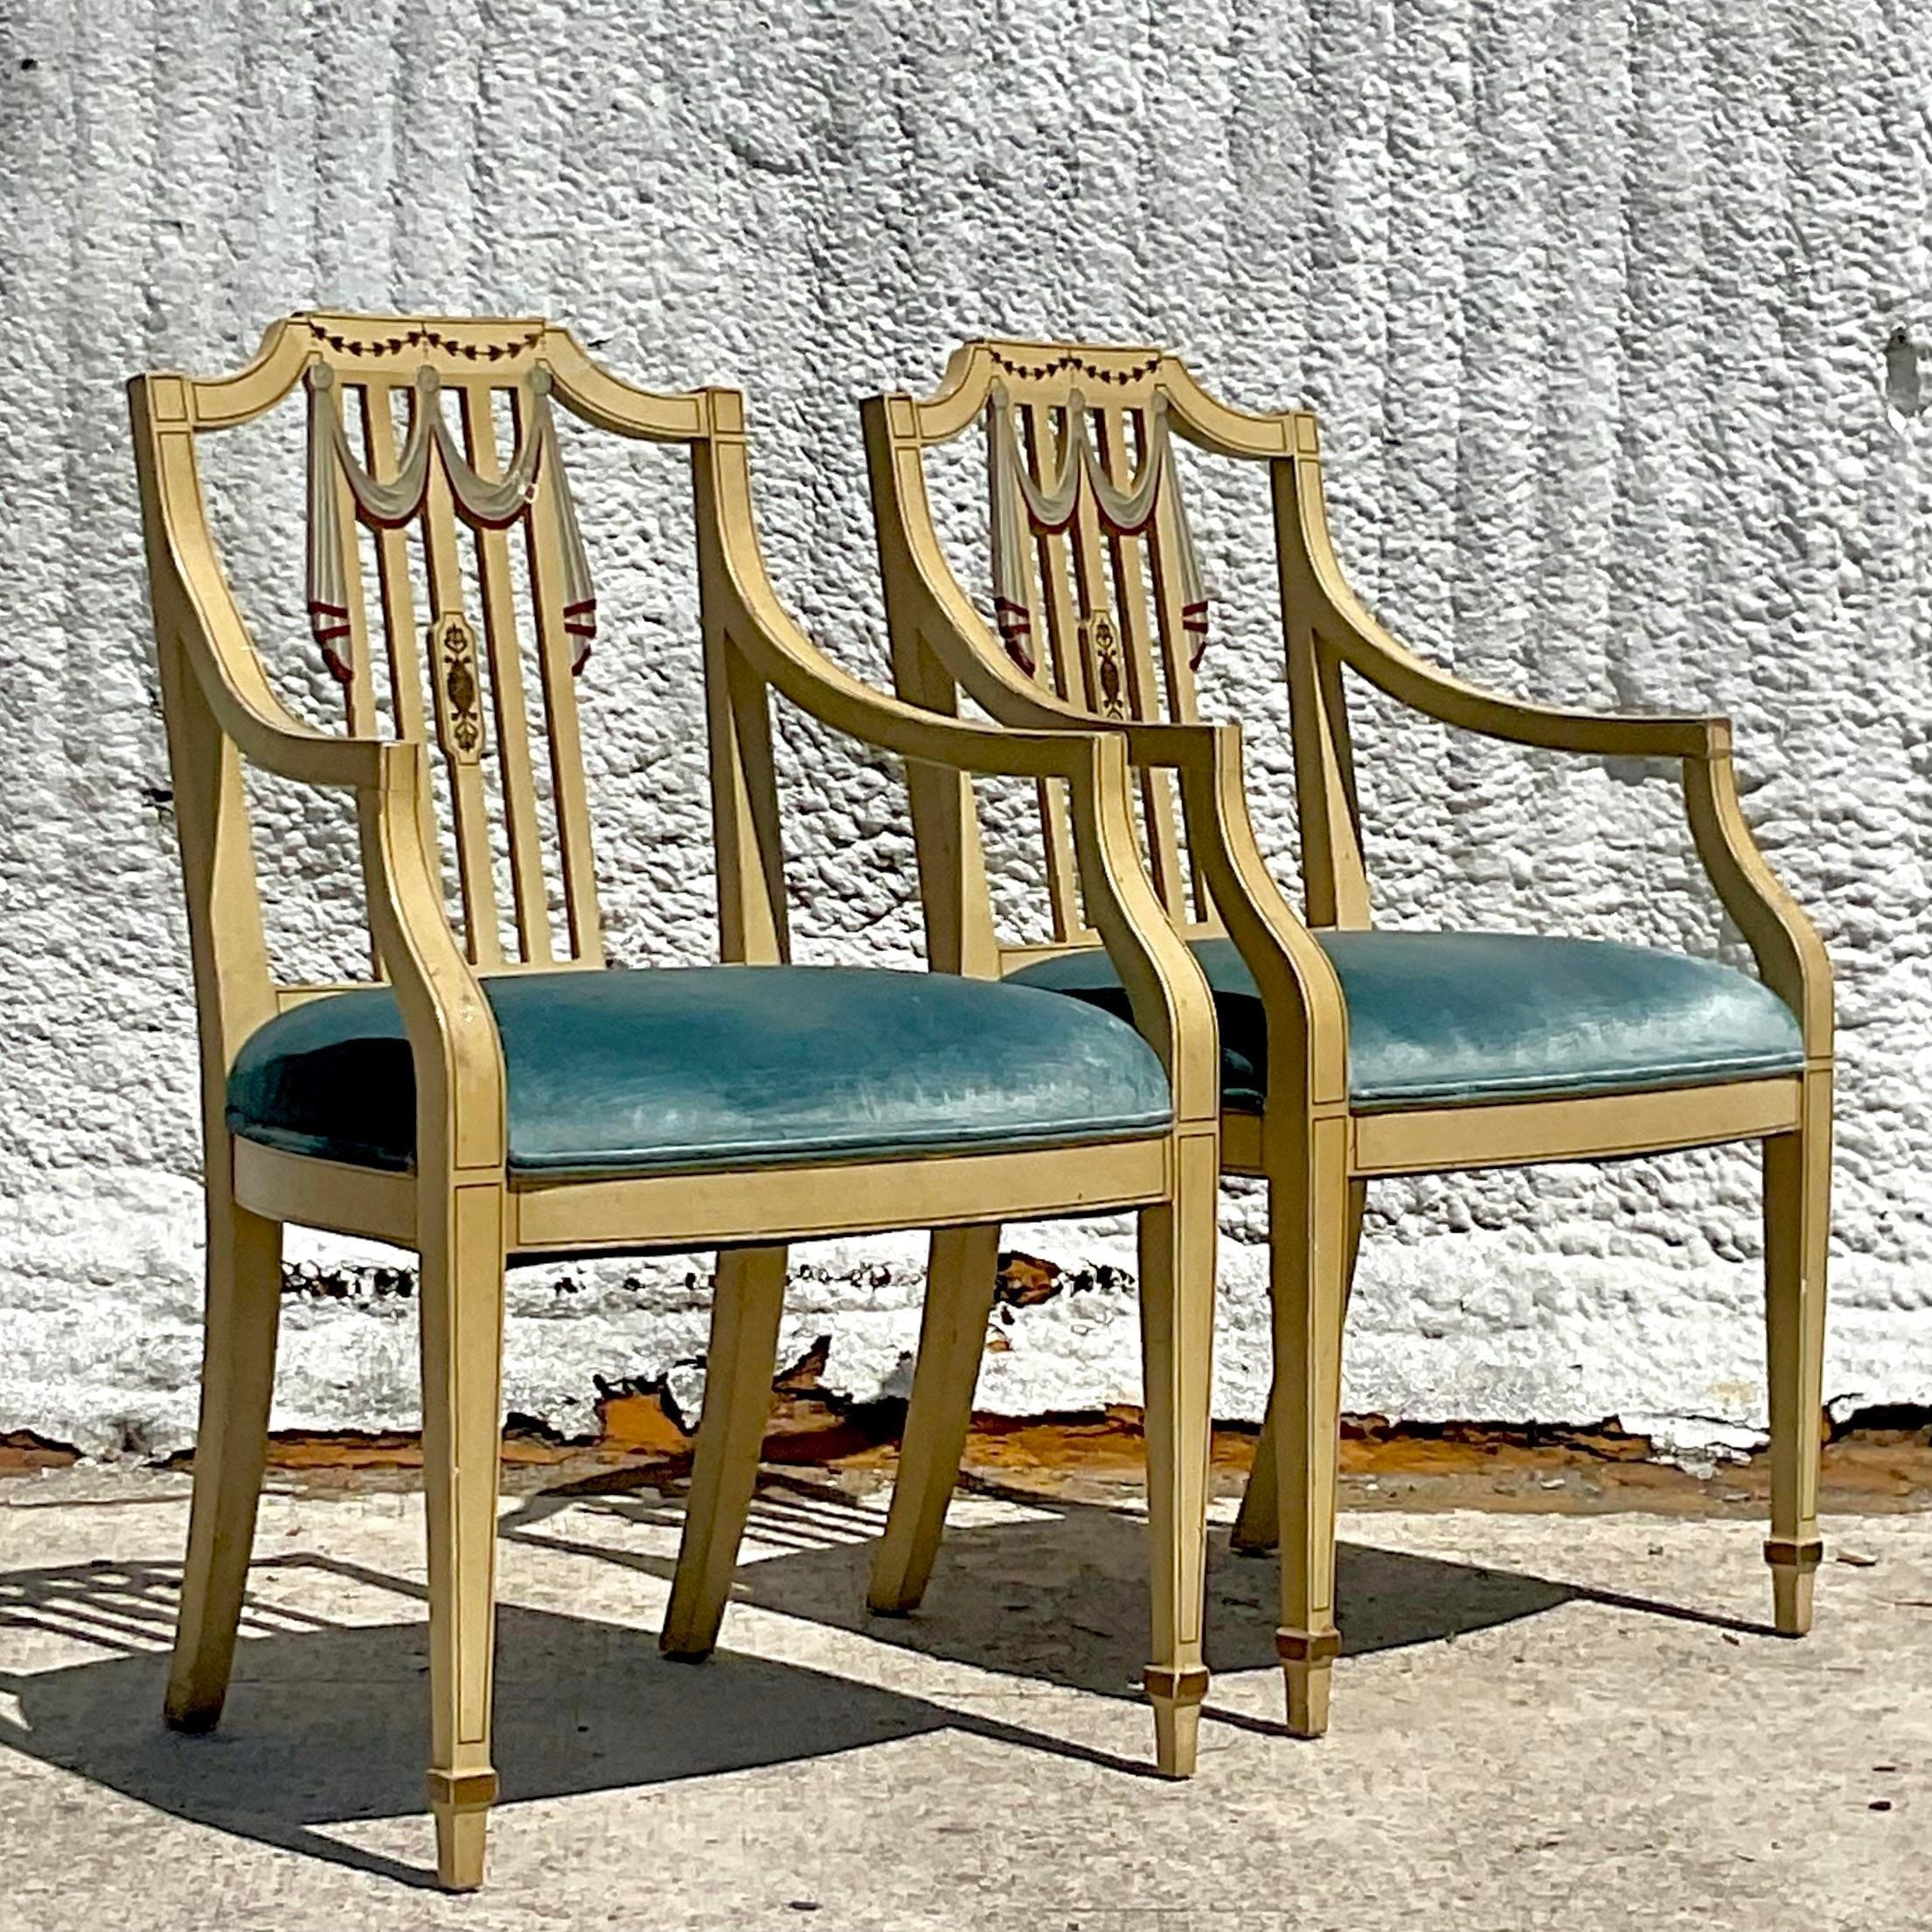 A fabulous pair of vintage Regency arm chairs. Brilliant hand painted Tromp l,oiel swag detail. Blue velvet seats with thr chic patina from time. Purchased in Italy and brought to the states. Acquired from a Palm Beach estate.